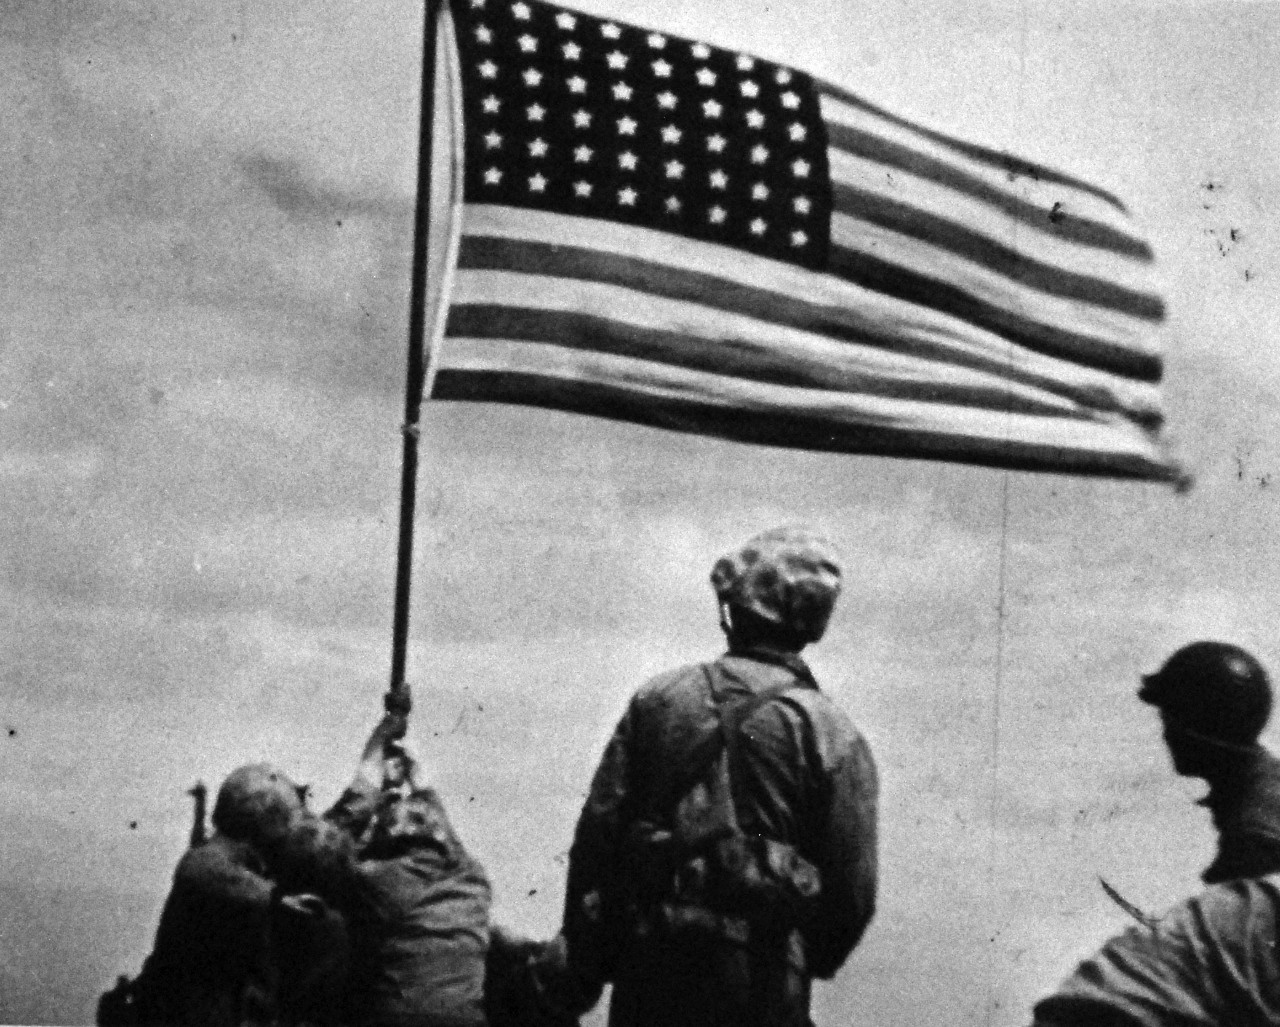 127-GW-319-146243: Iwo Jima Operations,  February 1945.  Iwo Jima Flag Raising on Mt. Suribachi.  Photographed by Dick, copied on October 3, 1946.     Official U.S. Marine Corps Photograph, now in the collections of the National Archives.  (2016/09/06).